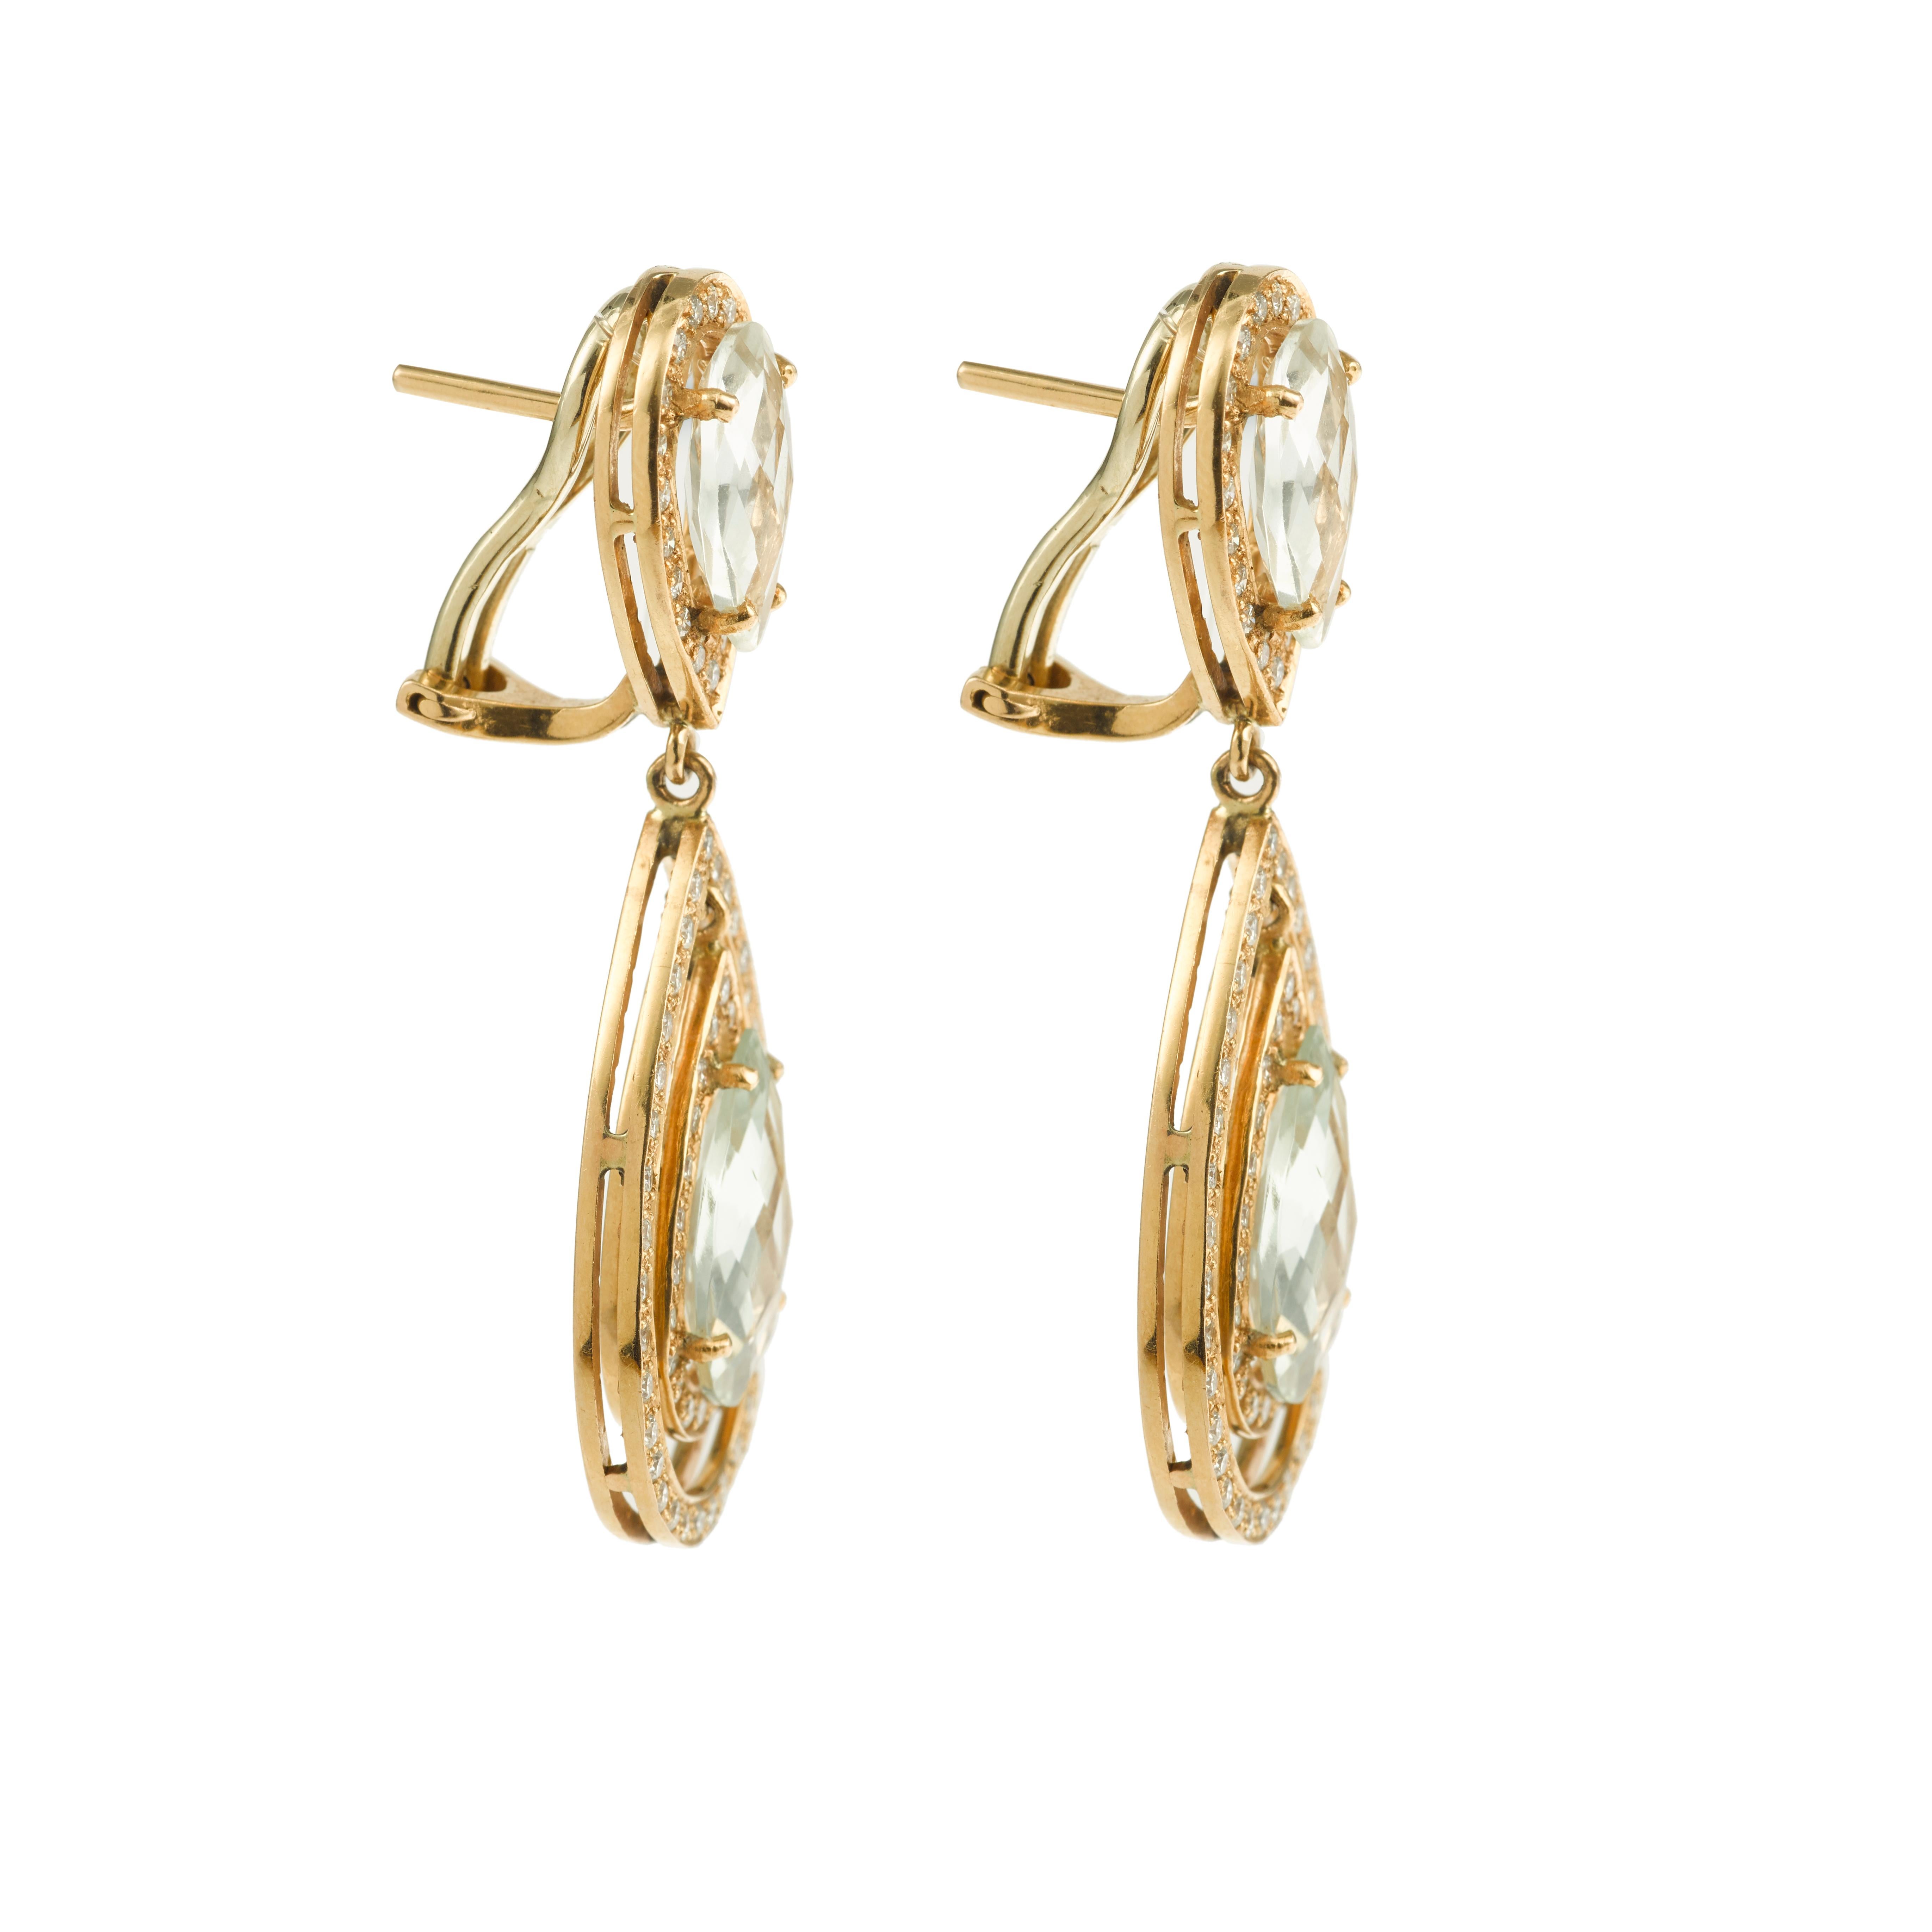 Spectacular and original pear cut quartz drops earrings surrounded by  2 circles of diamonds pave.

Yellow gold 18 carats, 750/1000eme

Diamonds weight approx: 1.50 cts

Height: 48mm

Width: 20mm

One of the kind!

Very elegant and chic !